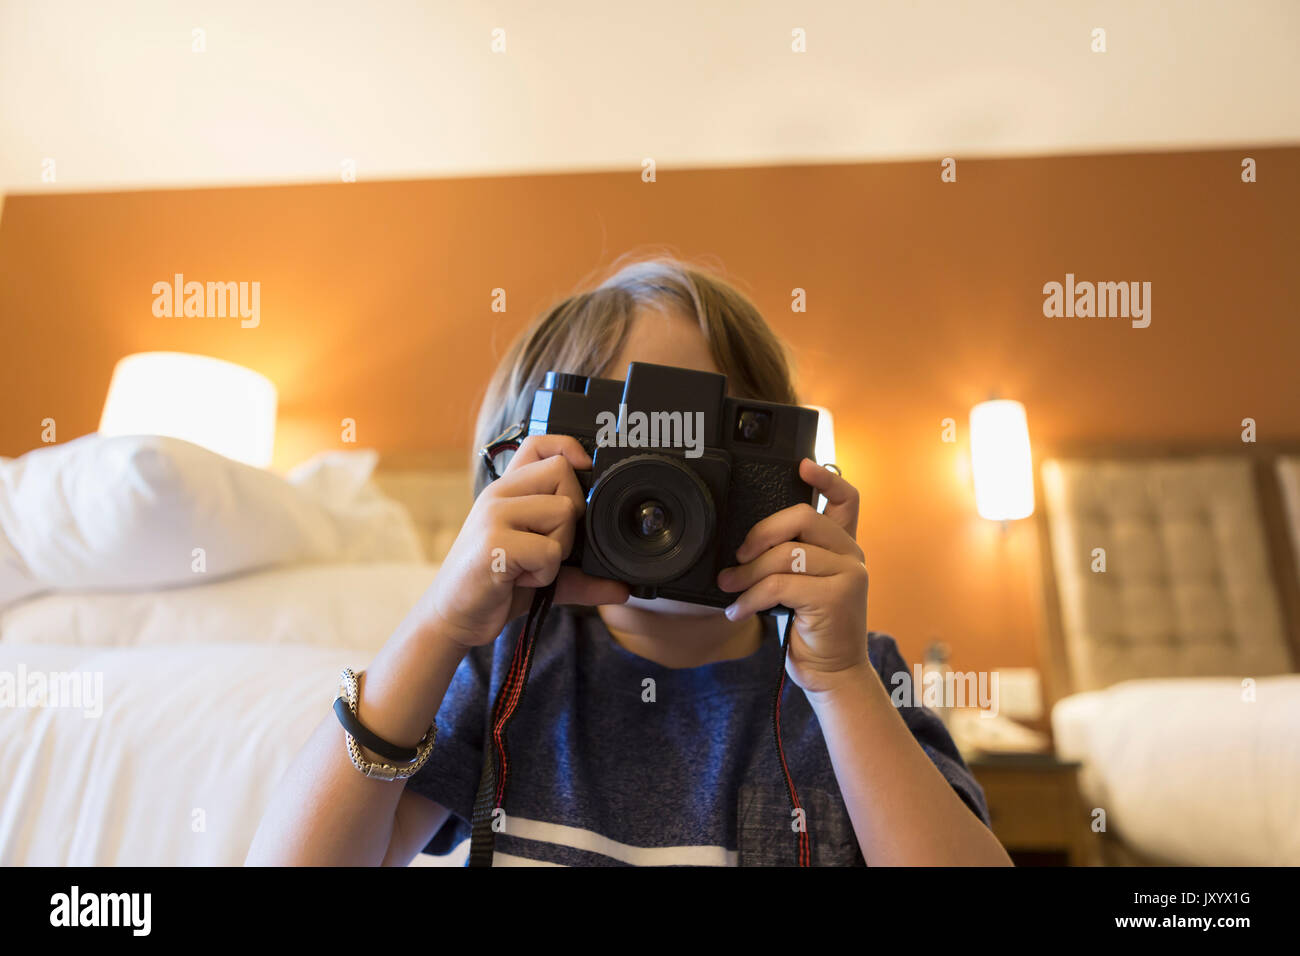 Caucasian boy photographing with camera in hotel room Stock Photo